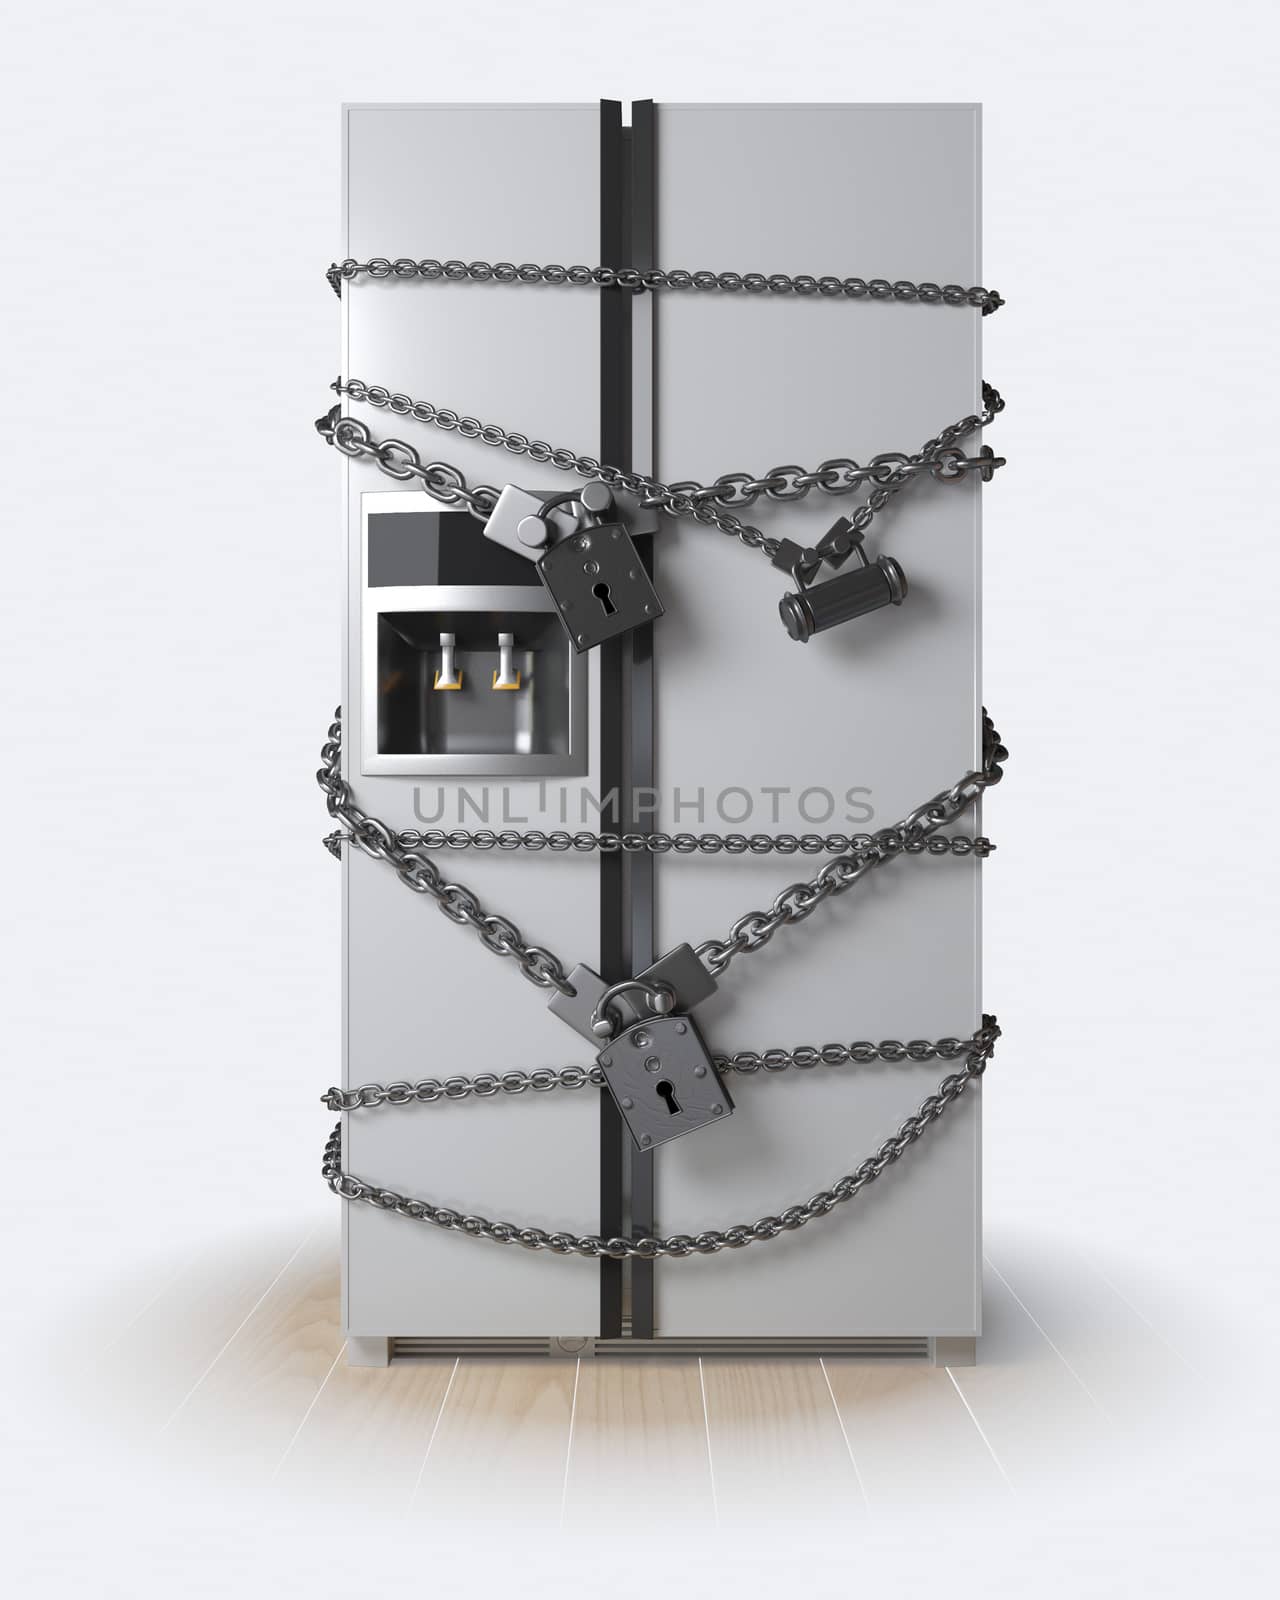 Dieting concept. Refrigerator, chain and lock